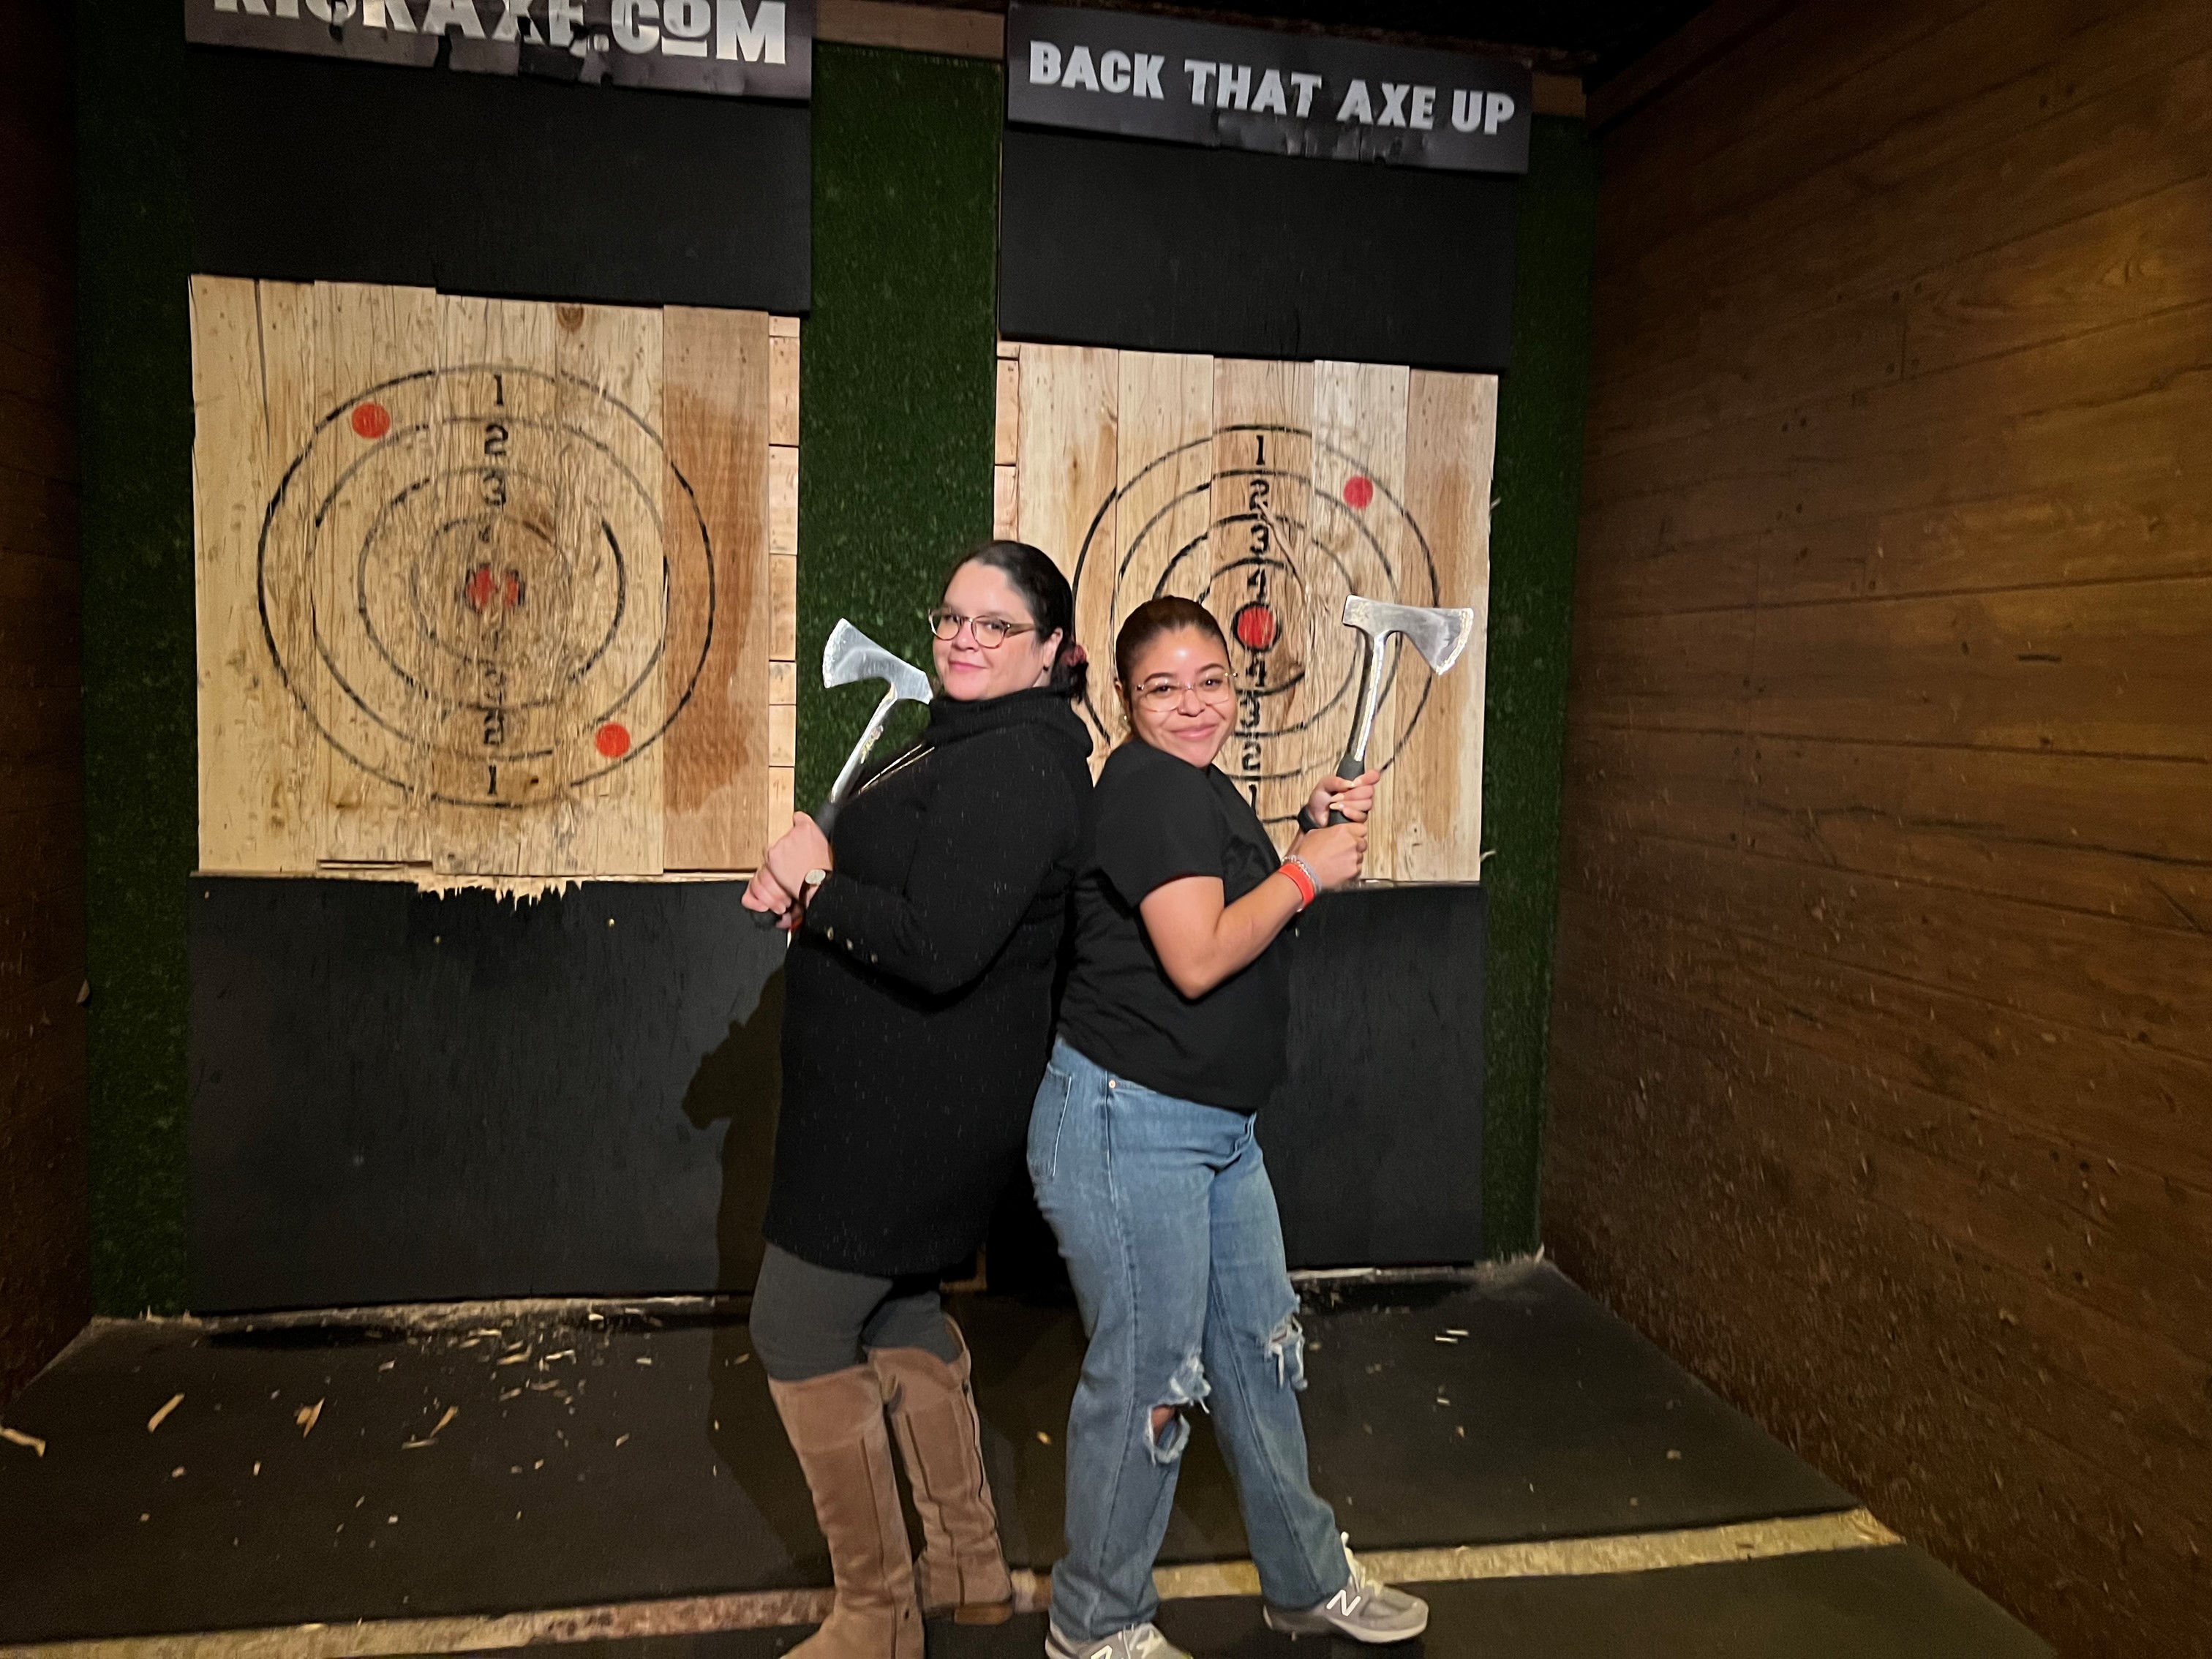 Two lab members pose while holding axes in front of the targets